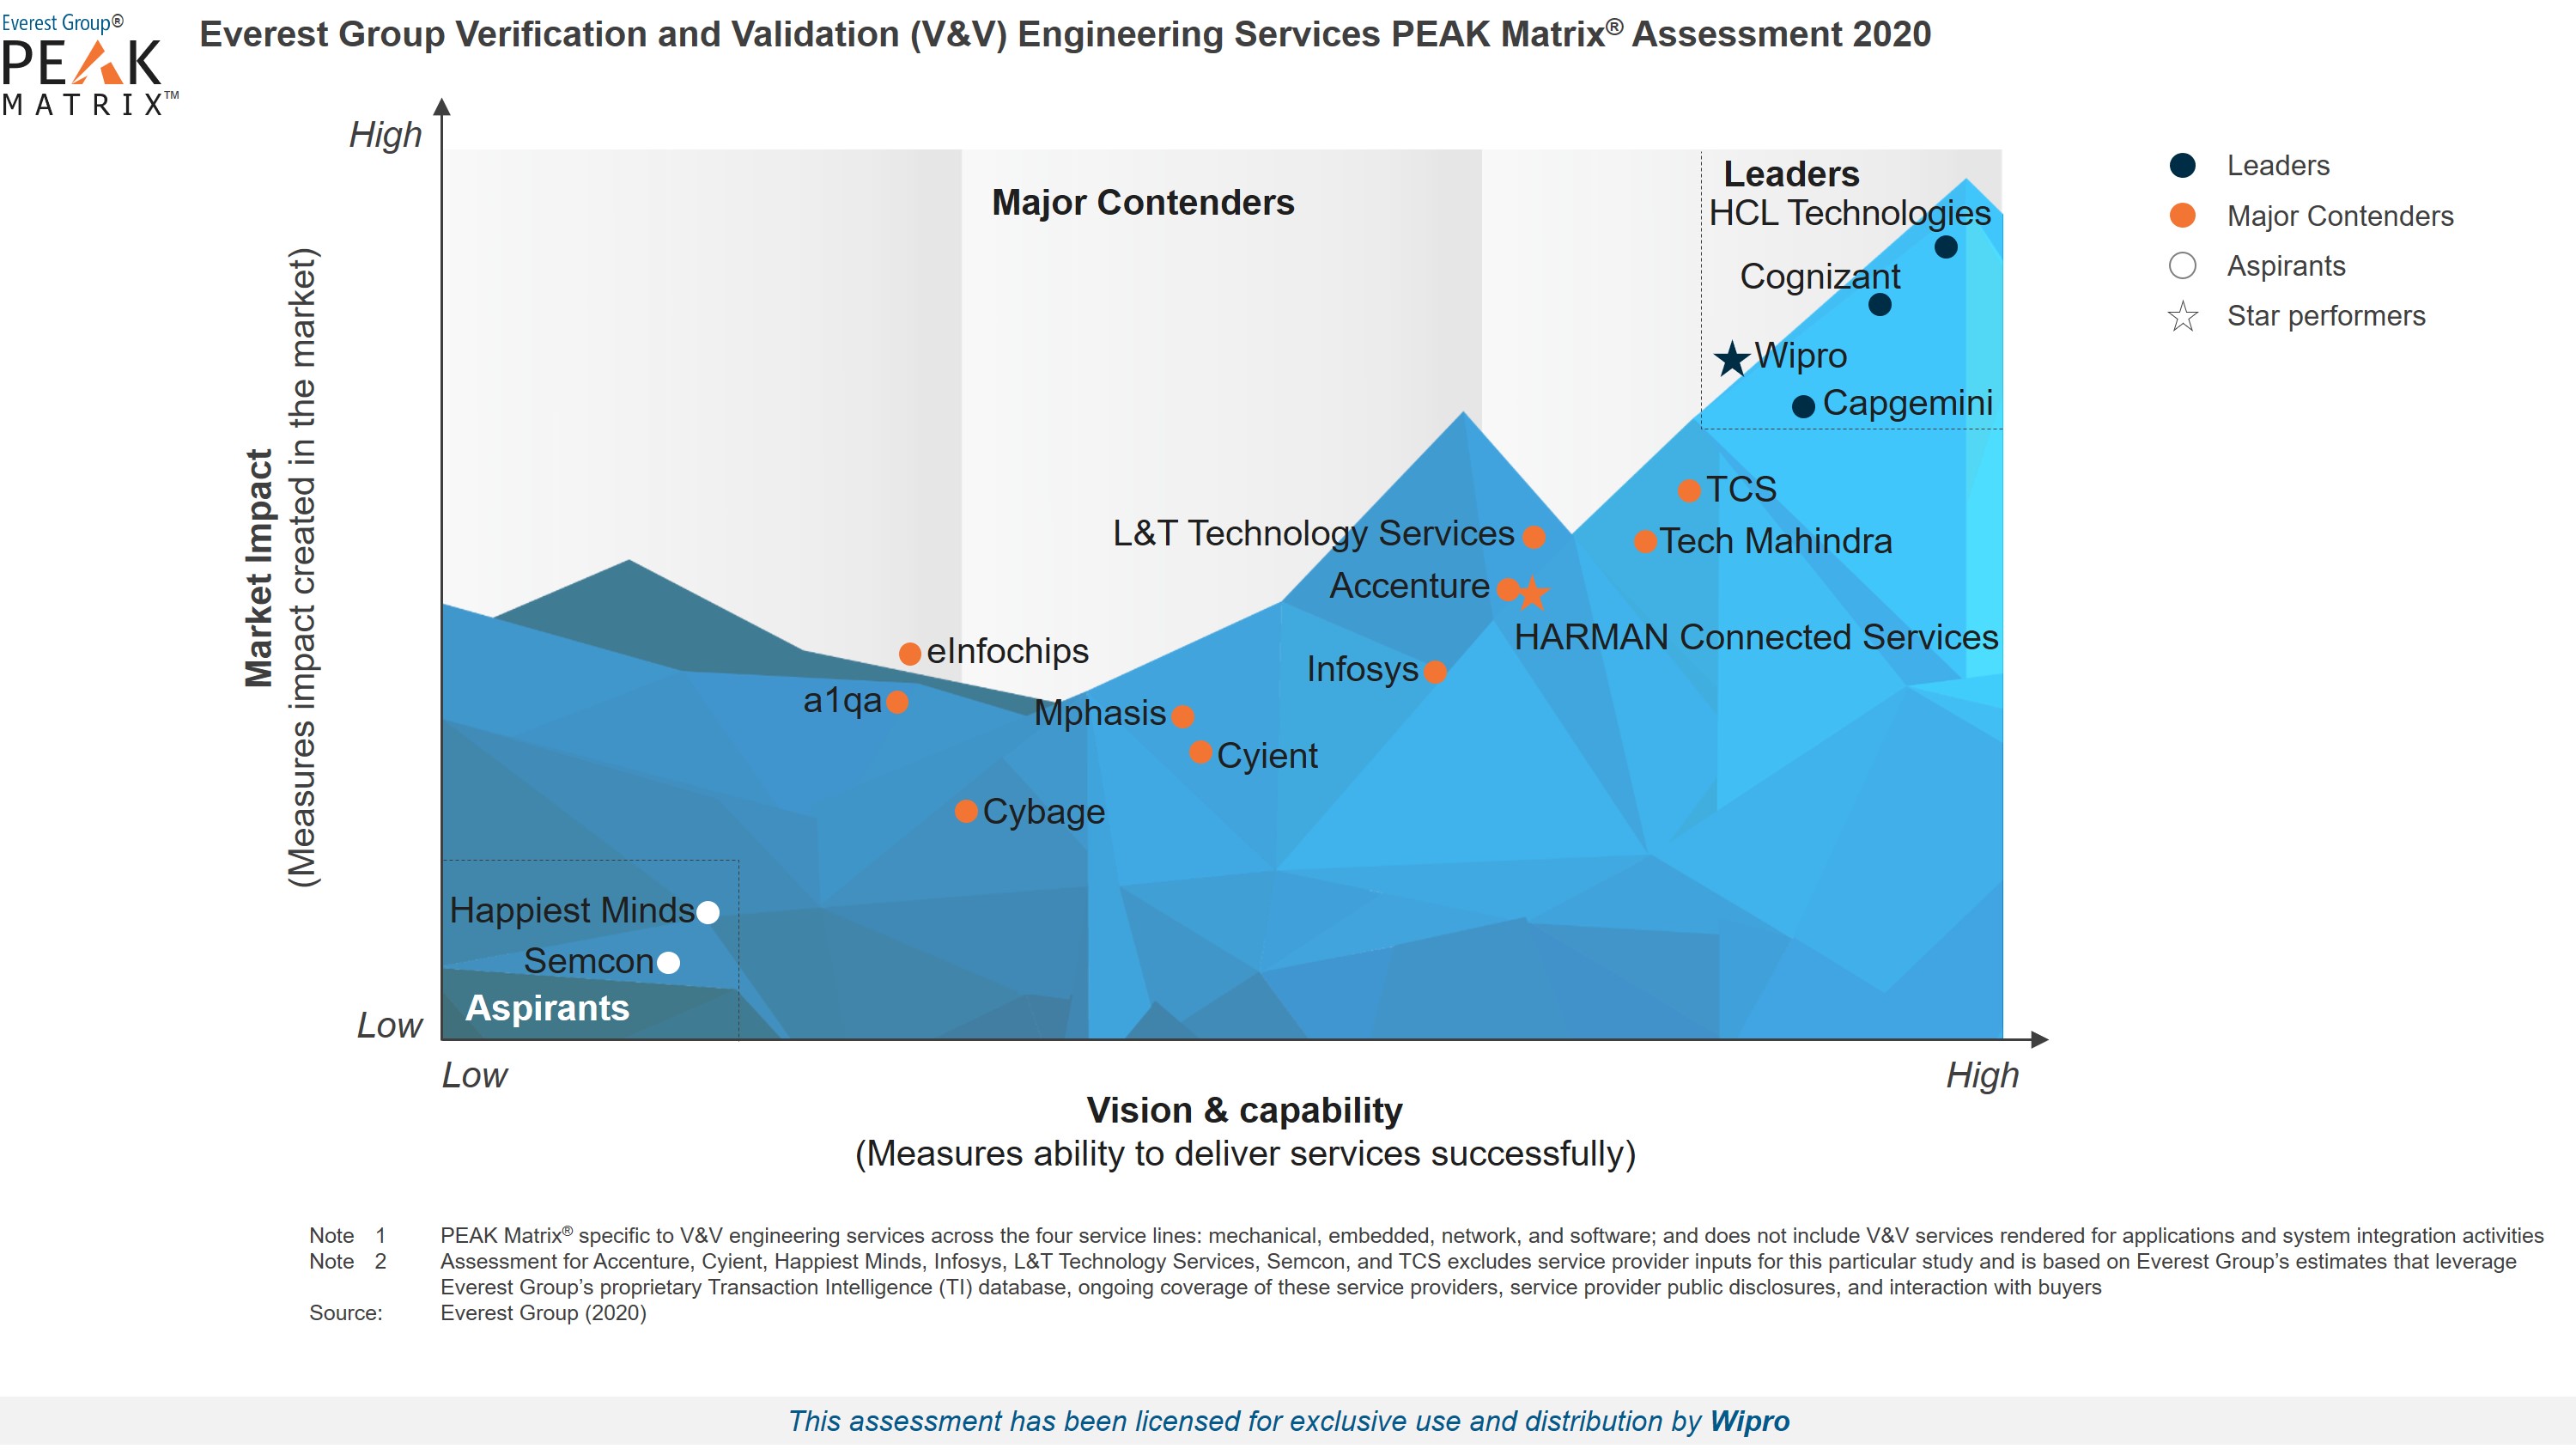 Wipro is a Leader and Star Performer in Verification and Validation Engineering Service Providers 2020